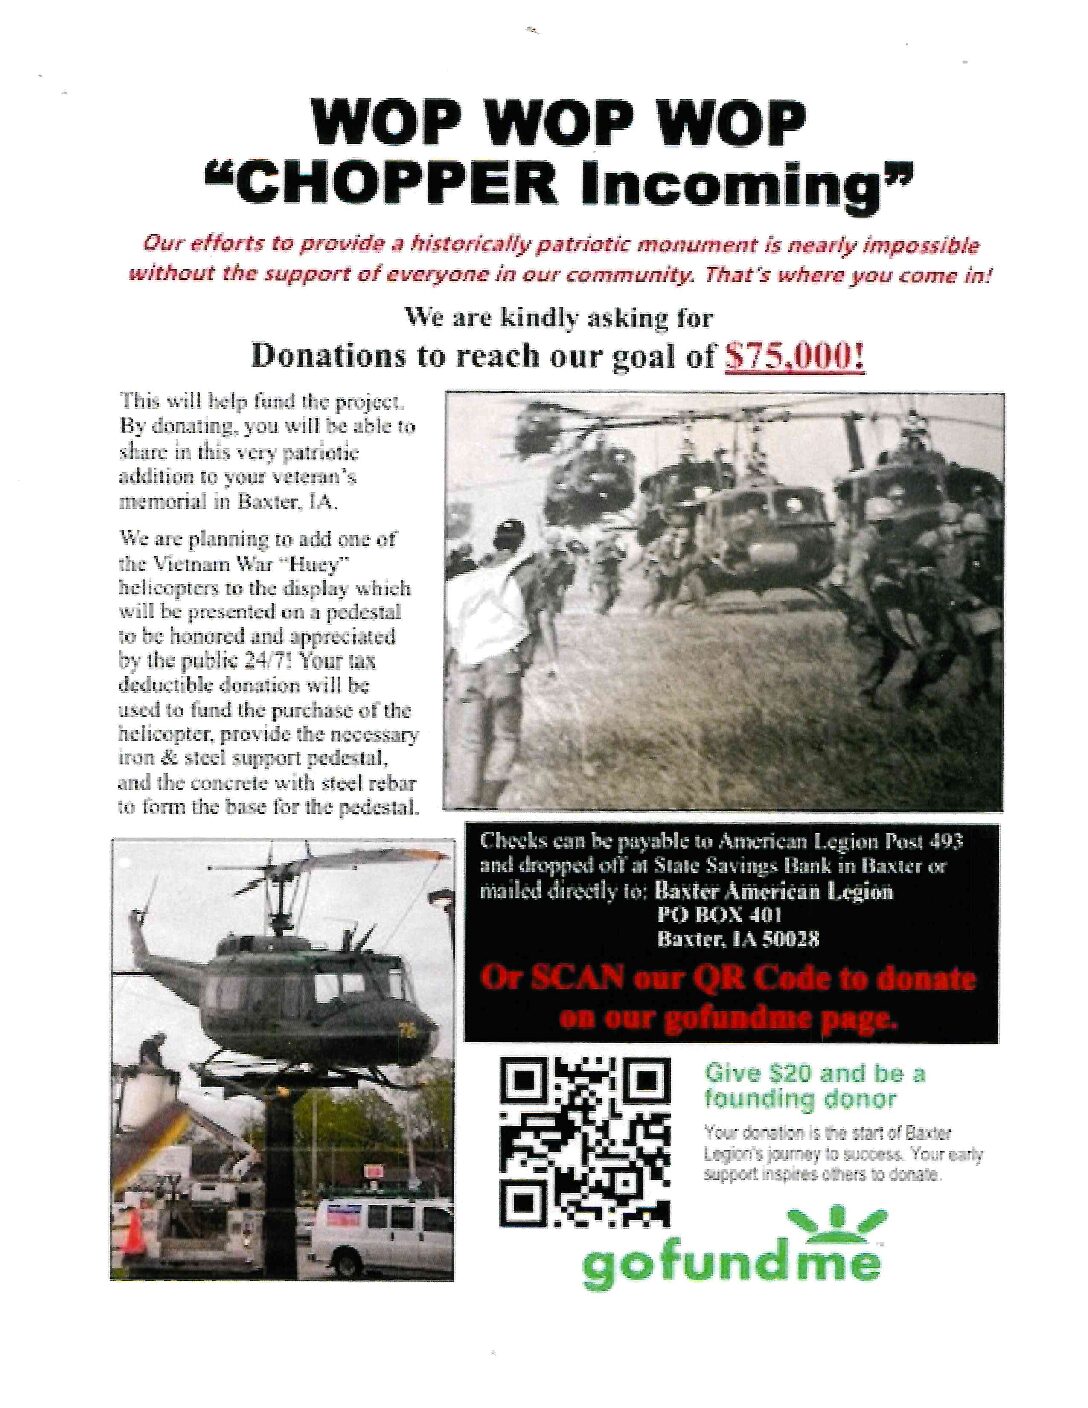 <h1 class="tribe-events-single-event-title">Fund Drive For “Huey” Helicopter In Baxter</h1>